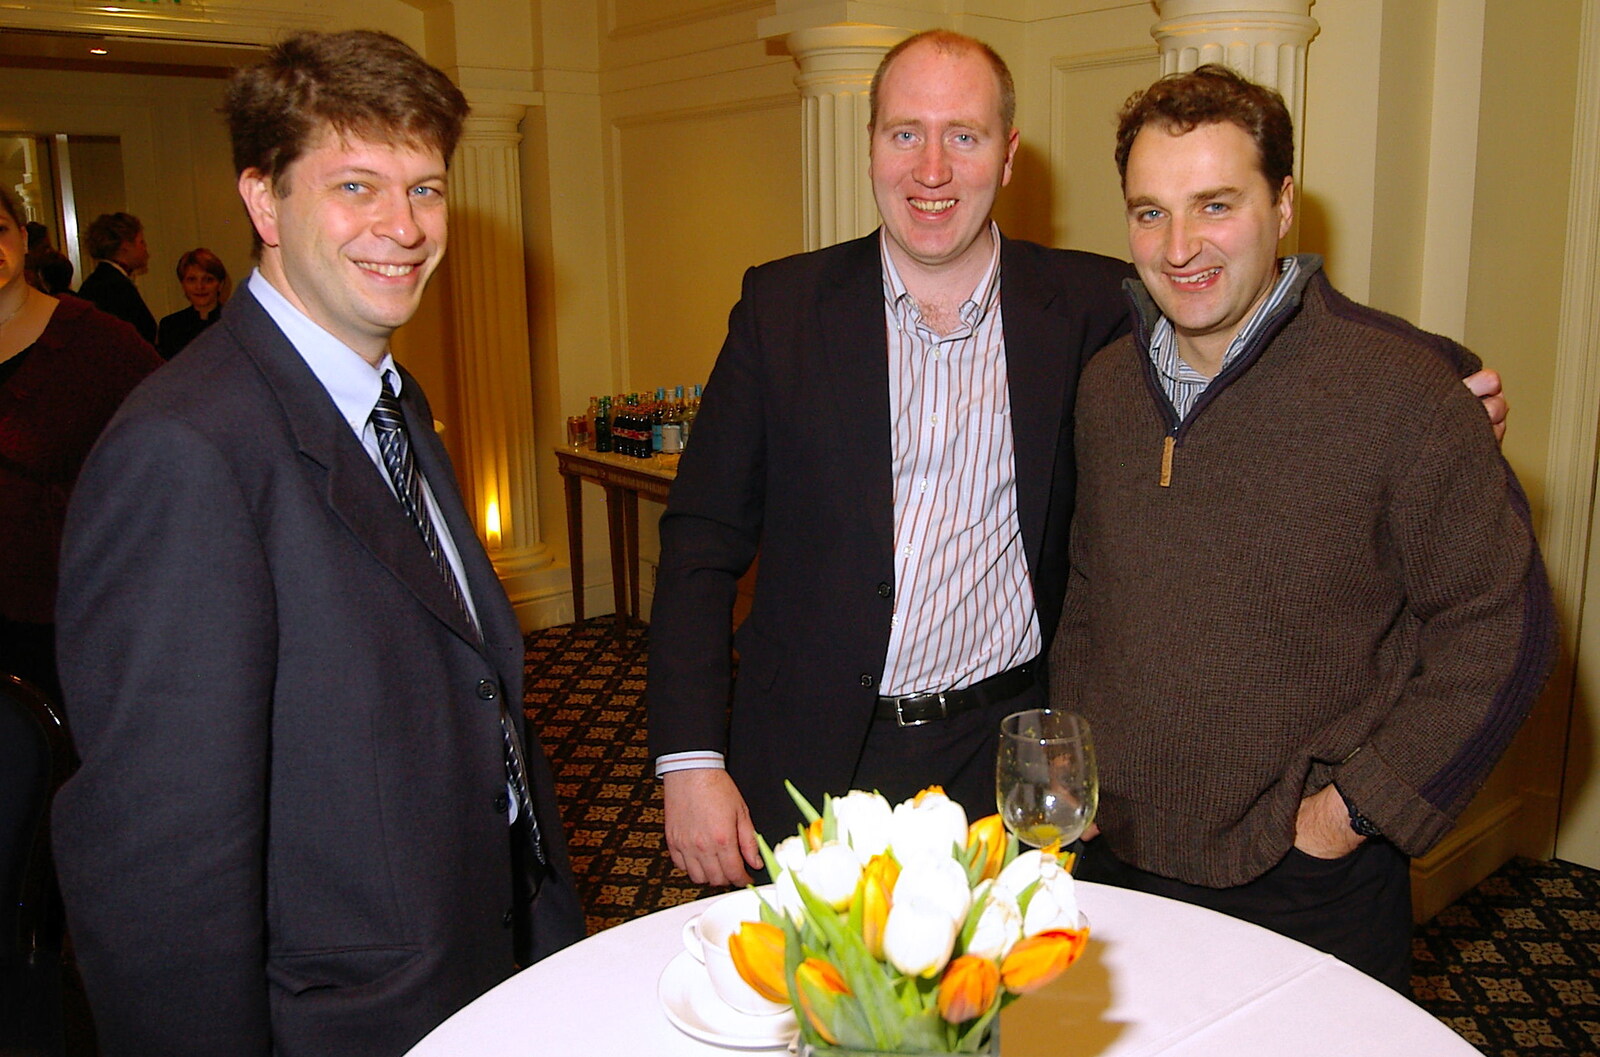 Angelo, Russell and Dan from Qualcomm Europe All-Hands at the Berkeley Hotel, London - 9th November 2005